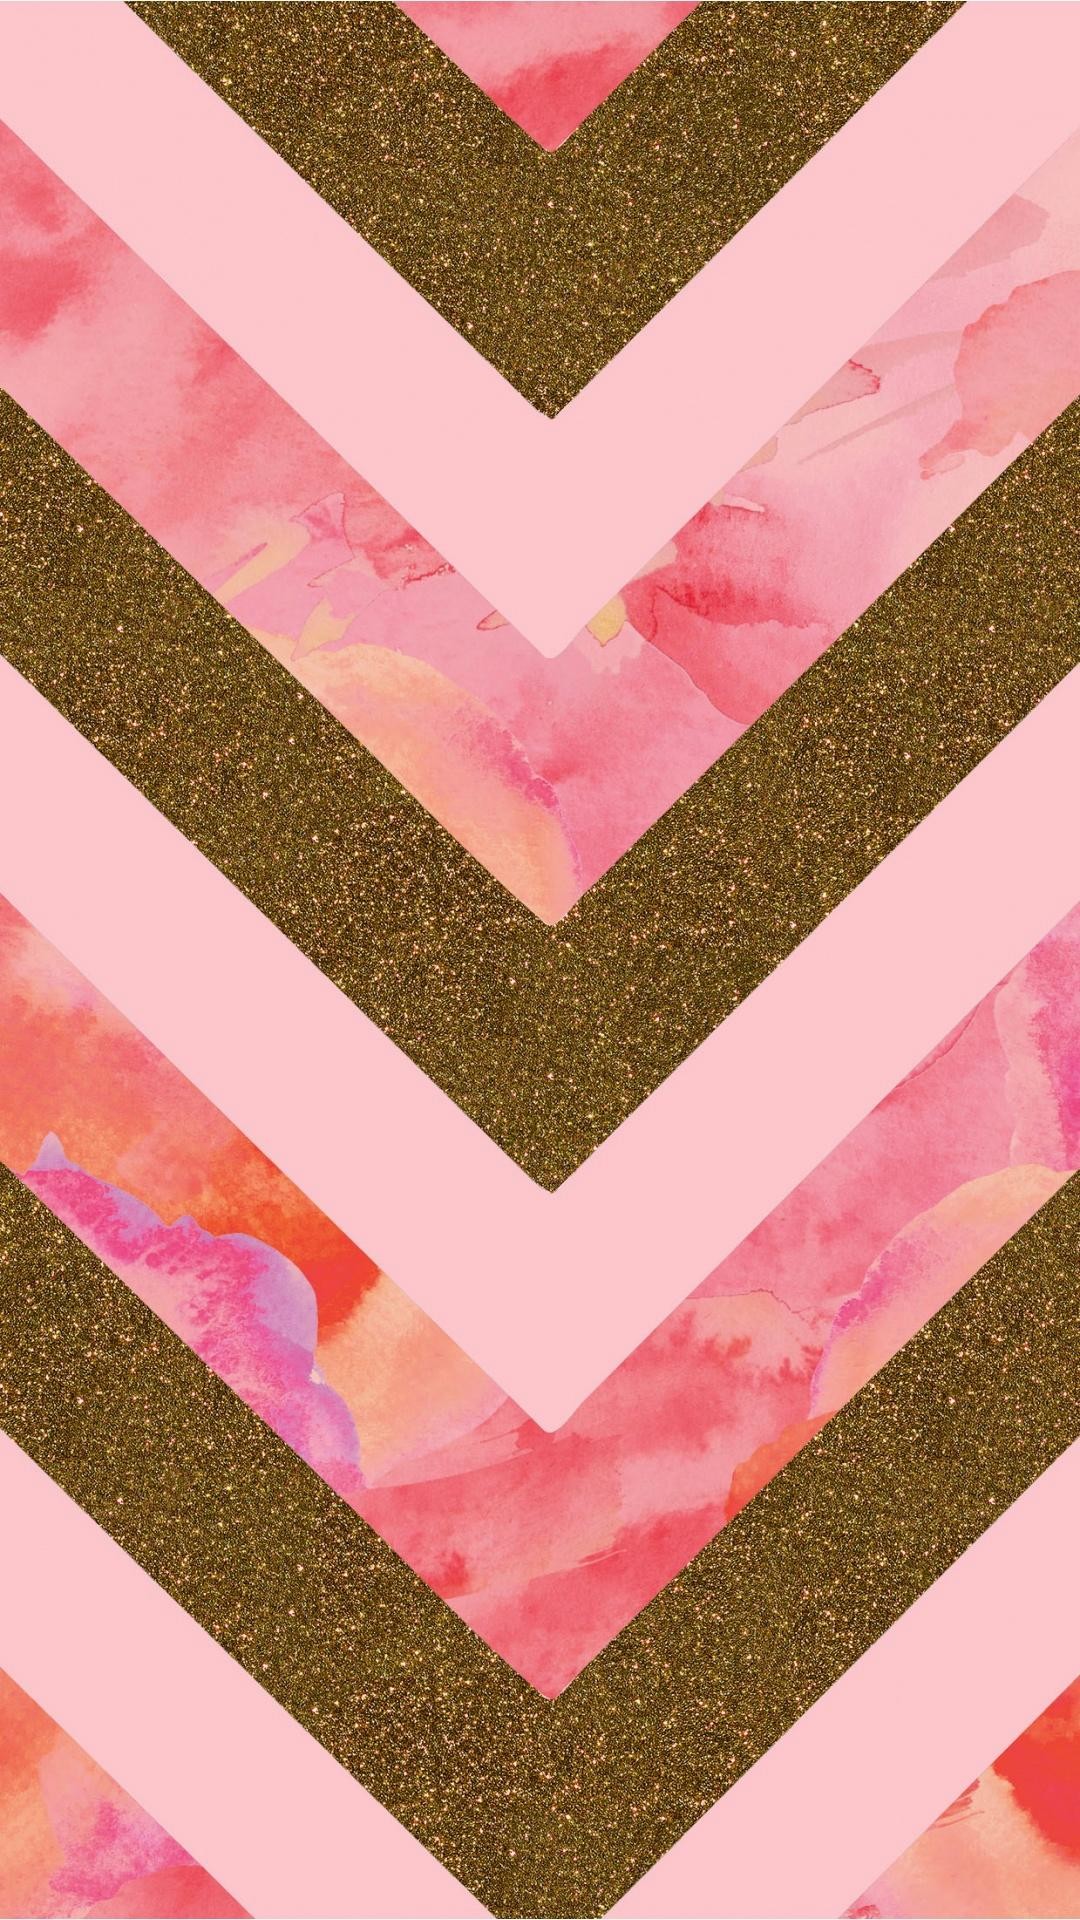 1080x1920 Glitter-and-Pink-Watercolor-Chevron.-Tap-to-see